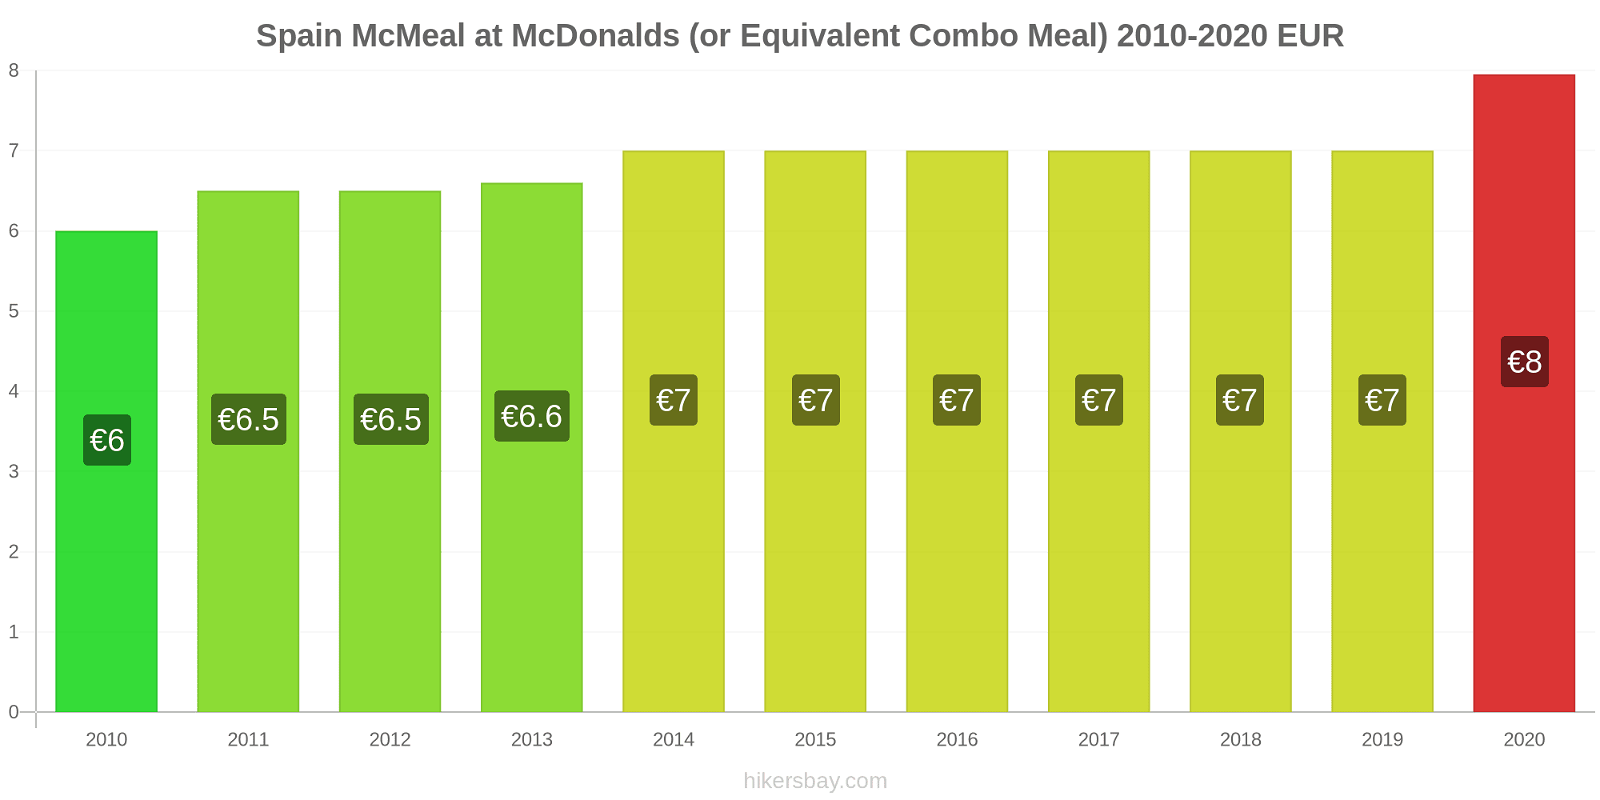 Spain price changes McMeal at McDonalds (or Equivalent Combo Meal) hikersbay.com